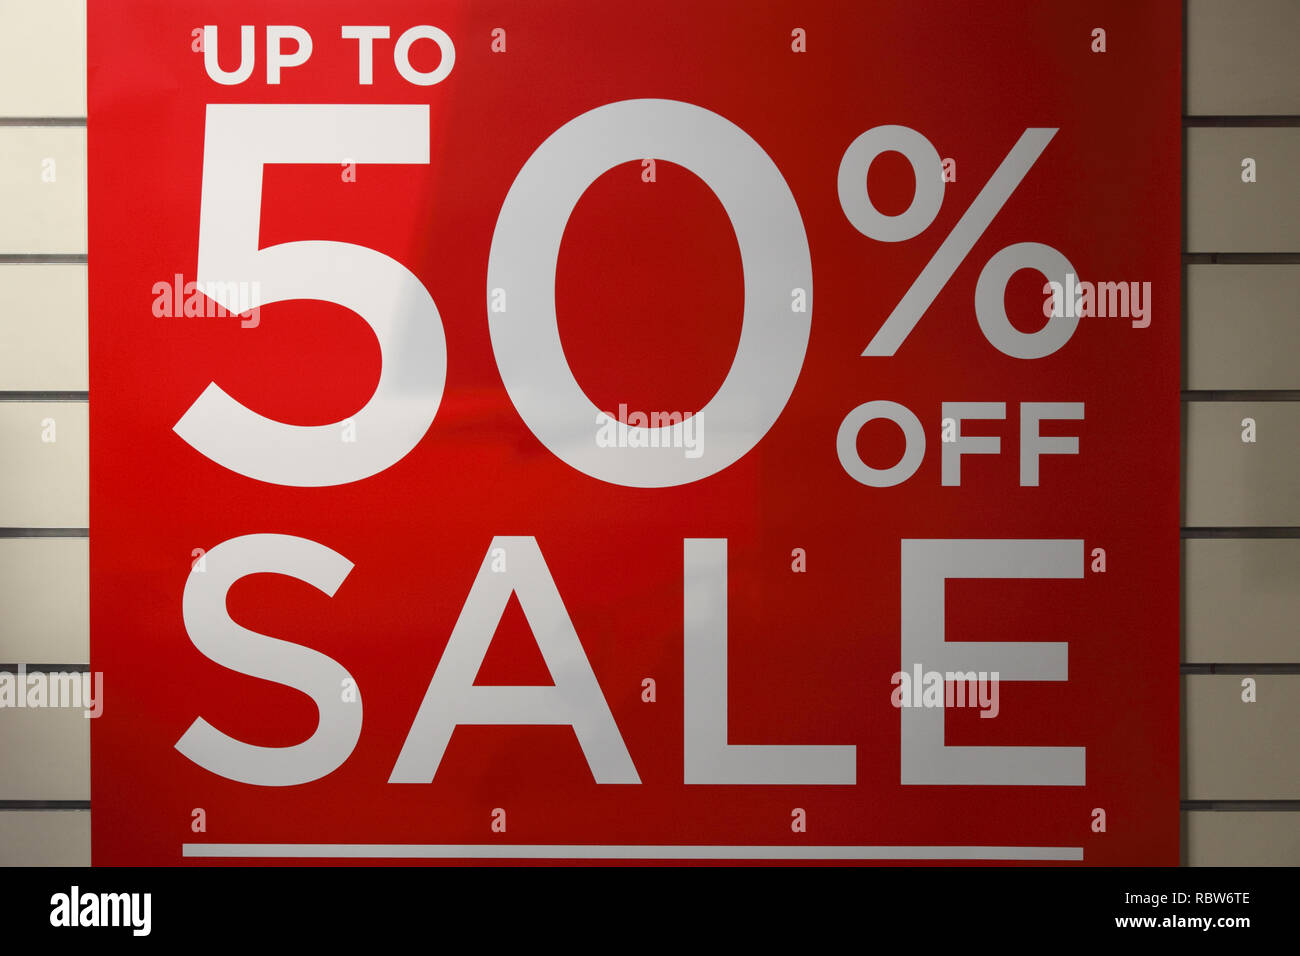 up to 50% sale off sign in a clothing store in the UK Stock Photo - Alamy